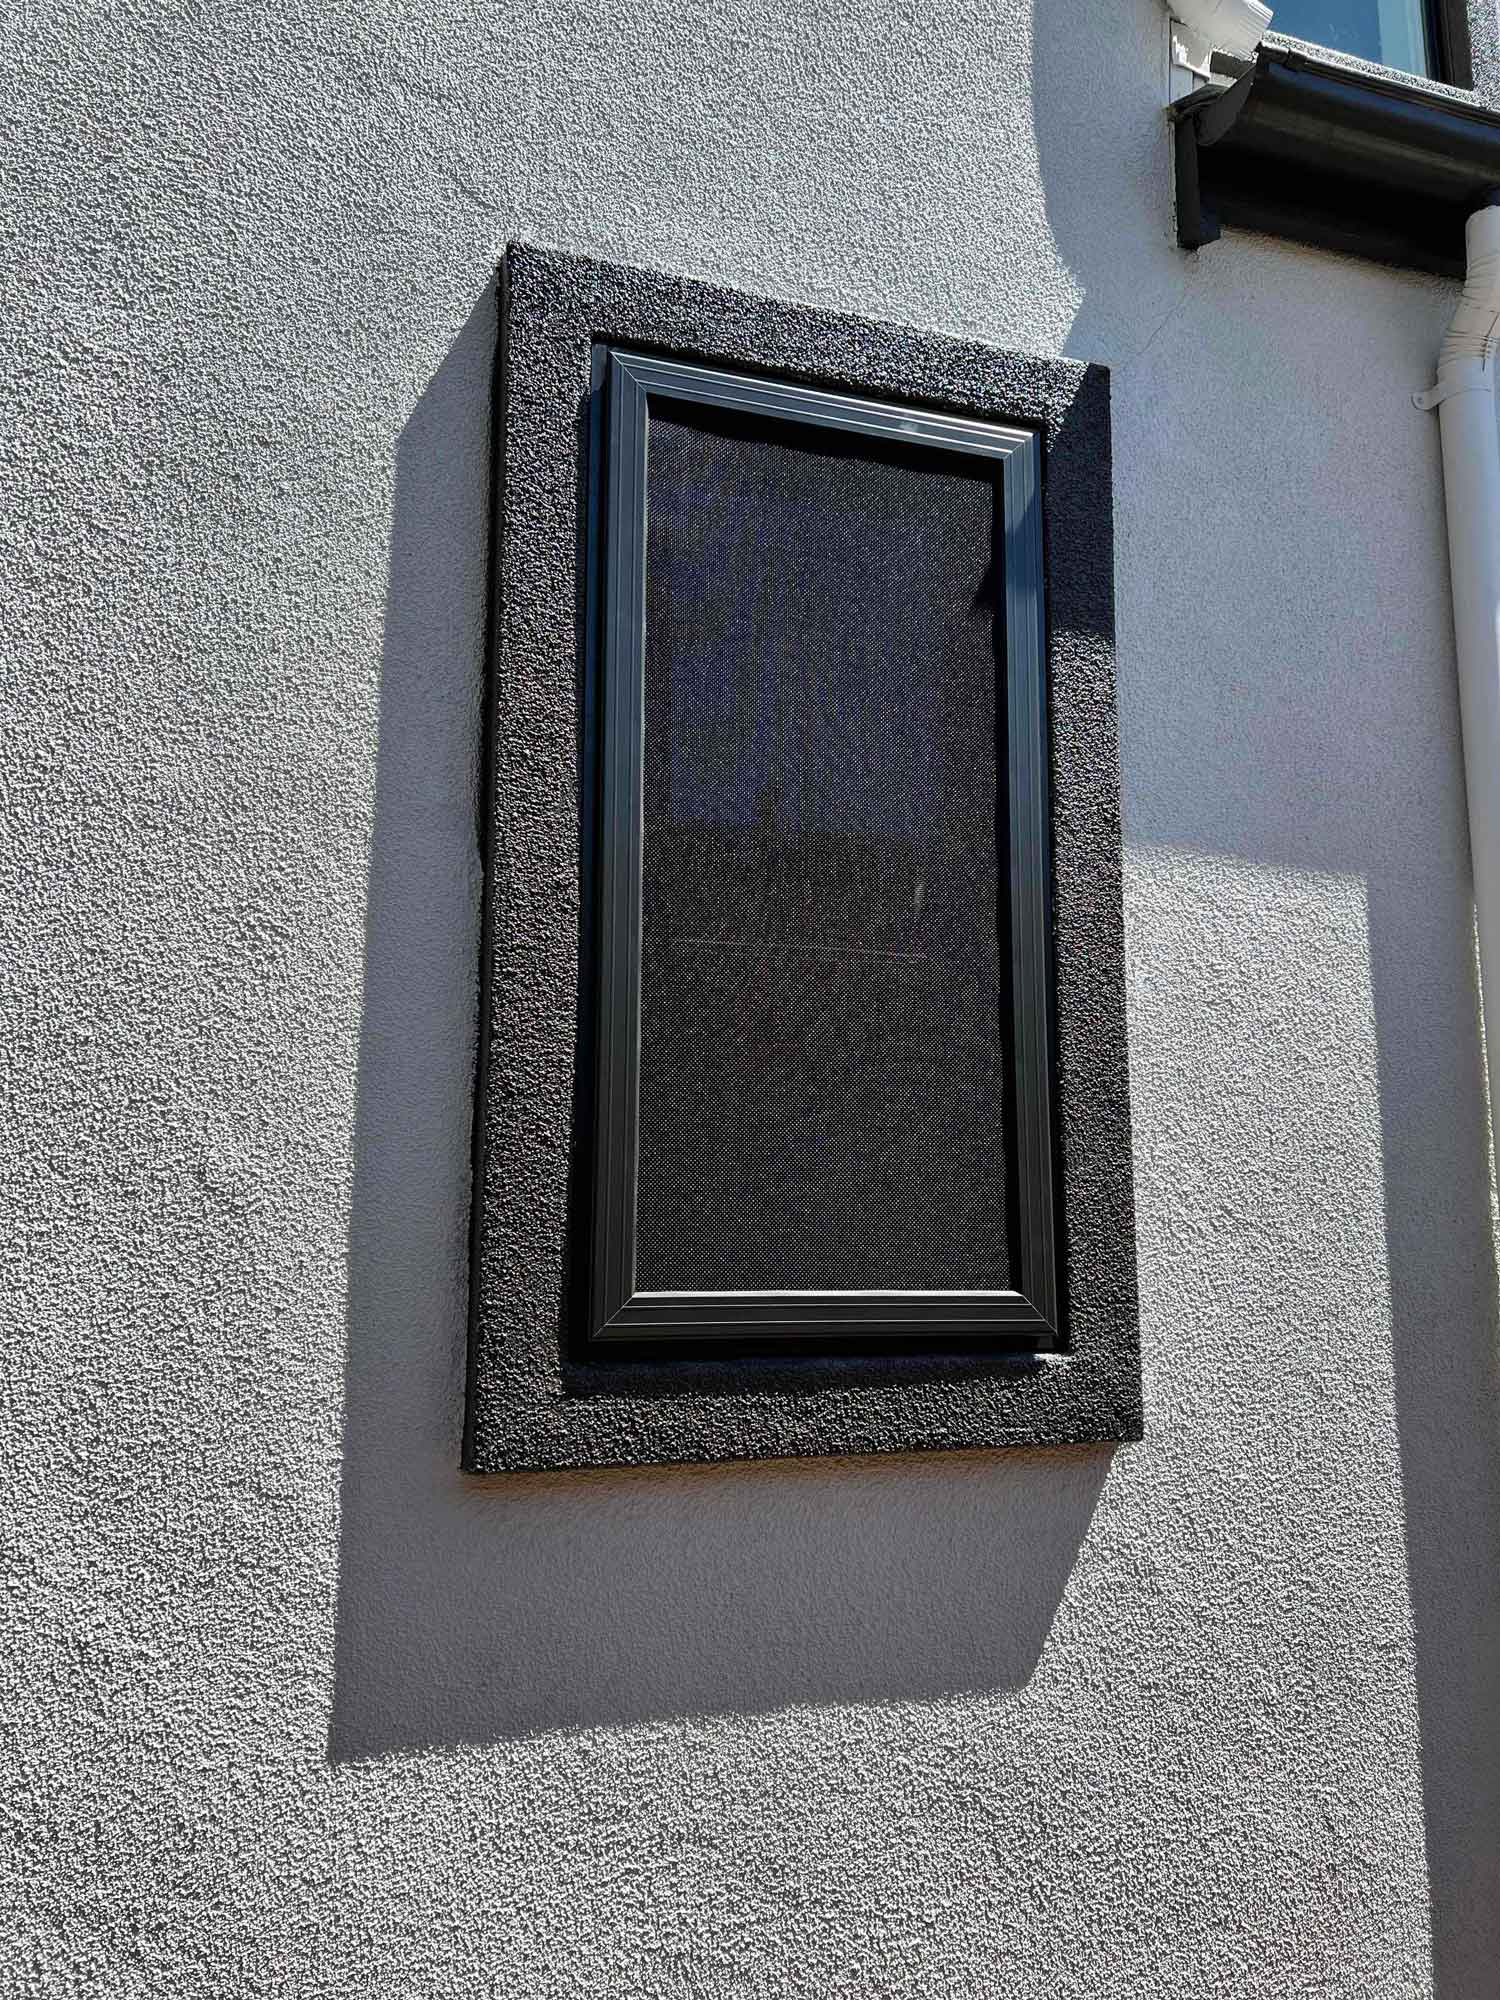 Crimsafe Security Screens are the best on the market for home security. Installed by ClimatePro in Redwood City, CA.